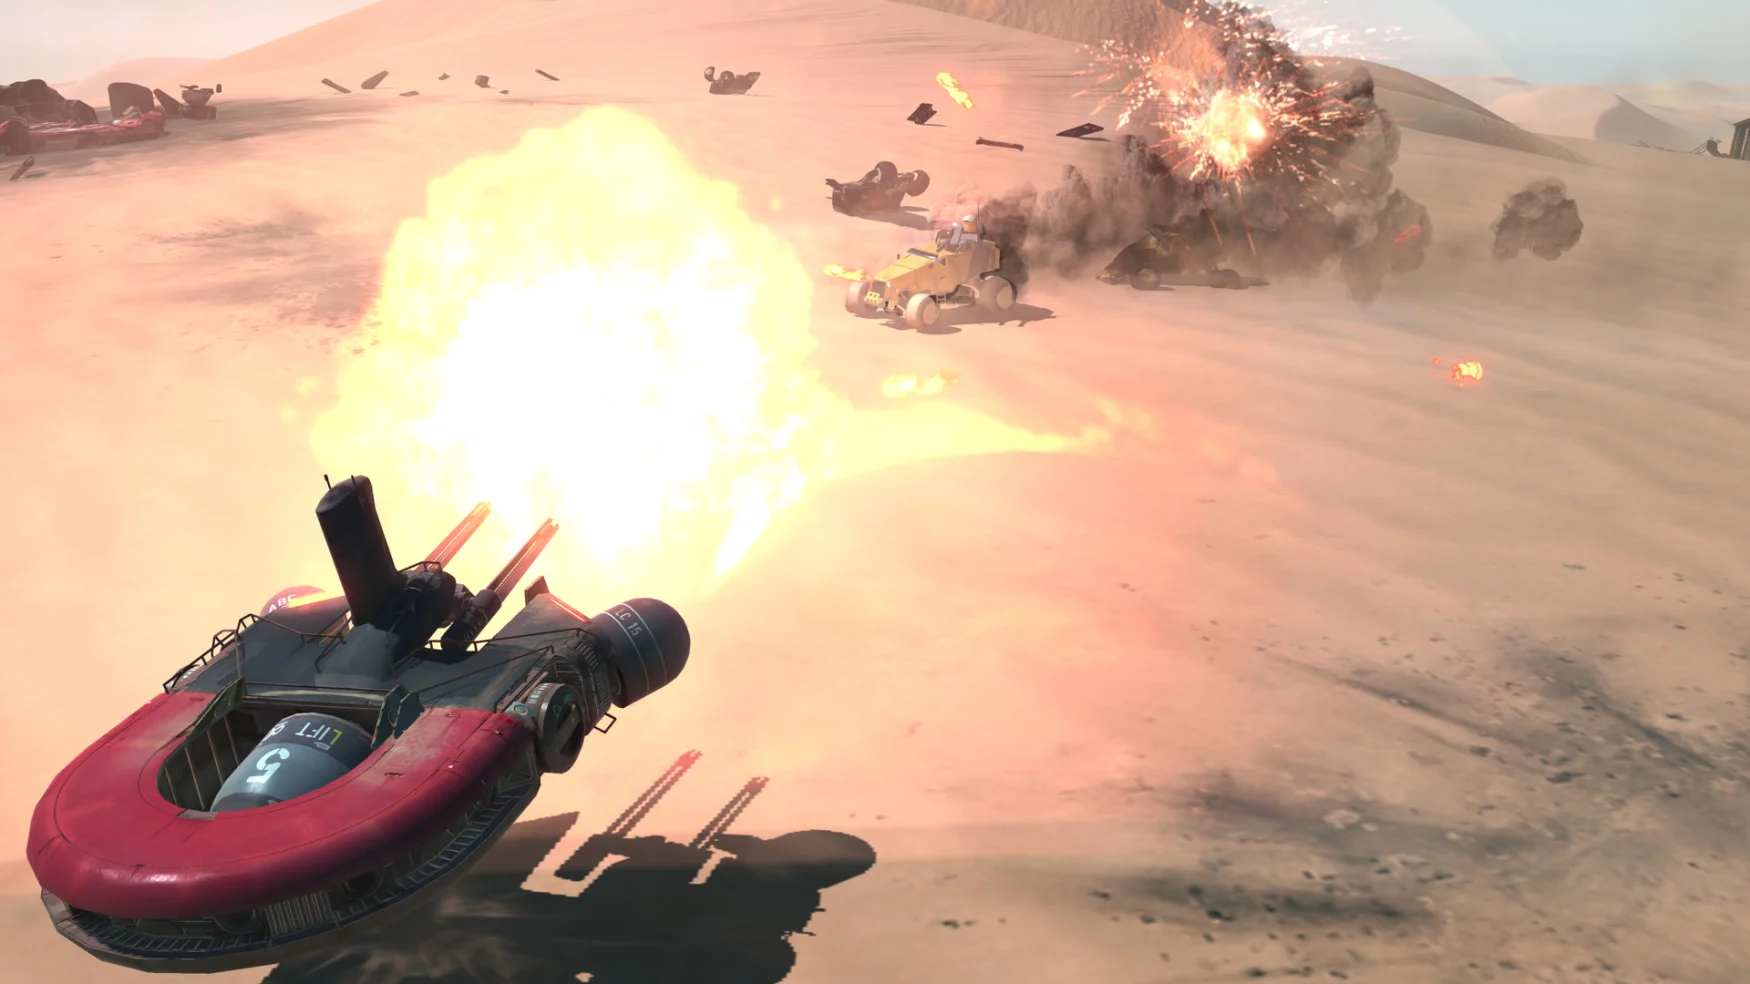 Promotional still from ‘Homeworld: Deserts of Kharak.’ A red tank with a U-shaped turret sends fiery blasts toward enemies in the distance. Desert environment, 2016 PC game graphics.